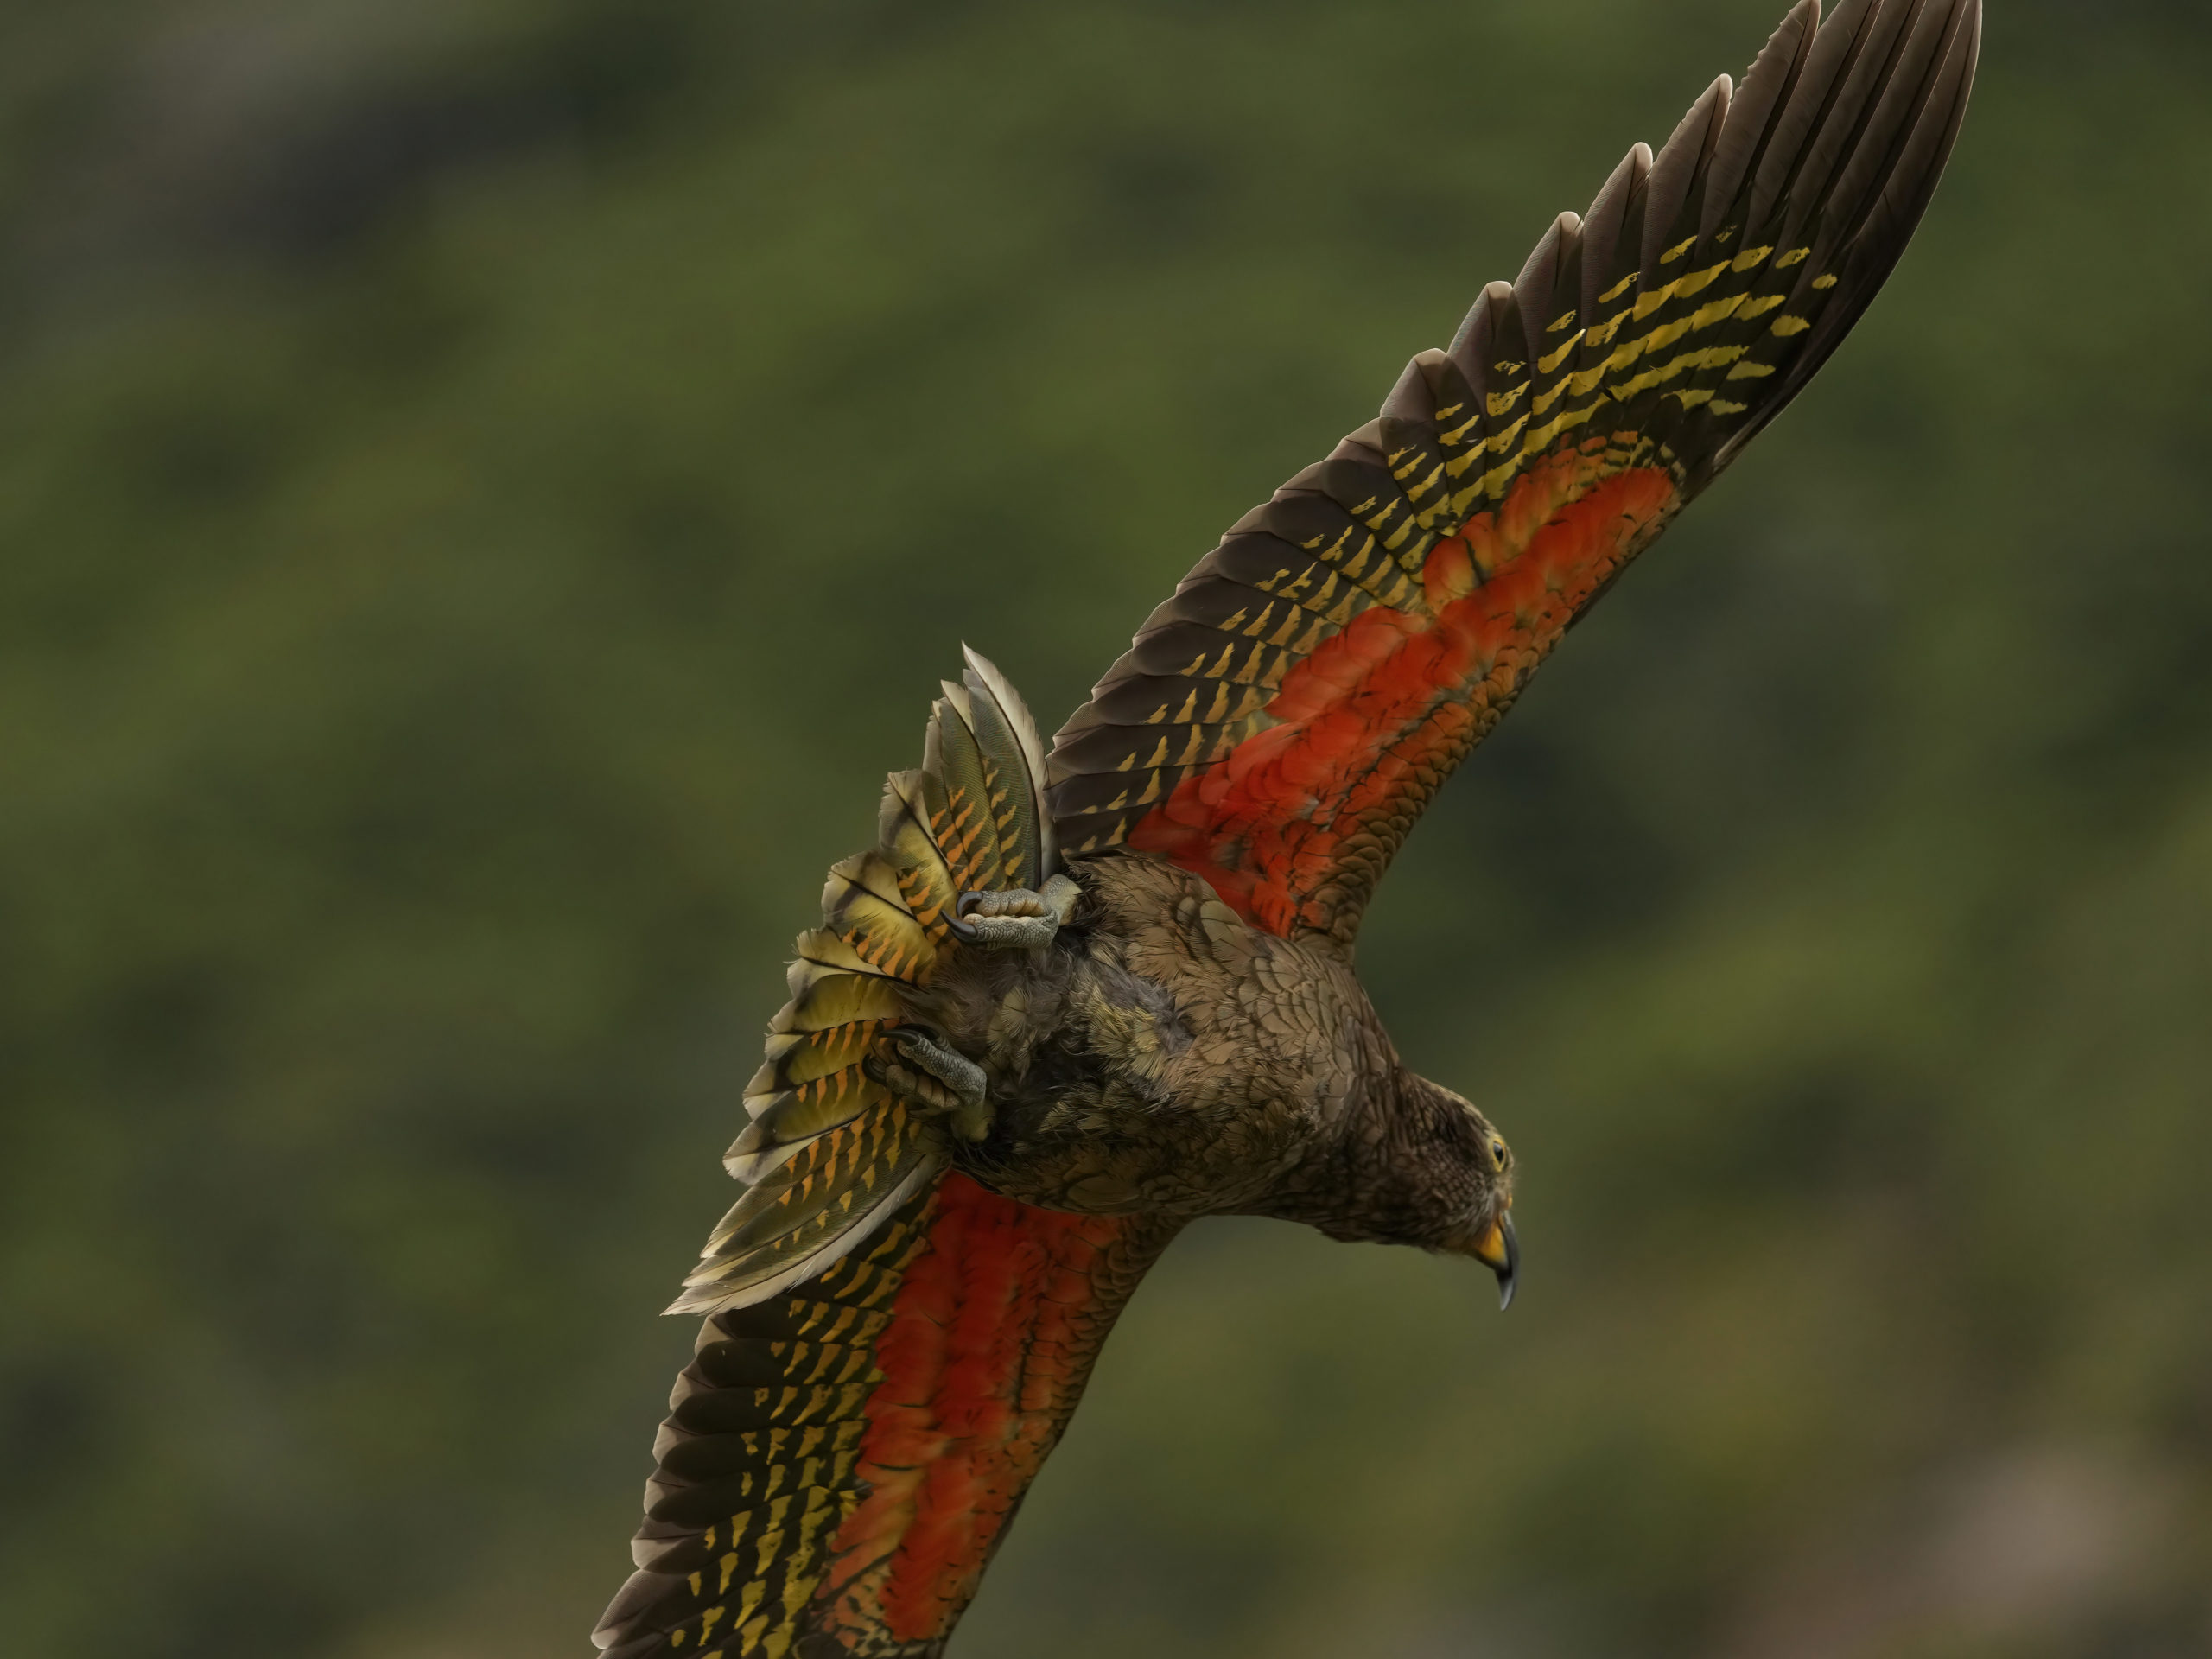 Kea in flight showing its bright red feathers under its wings.